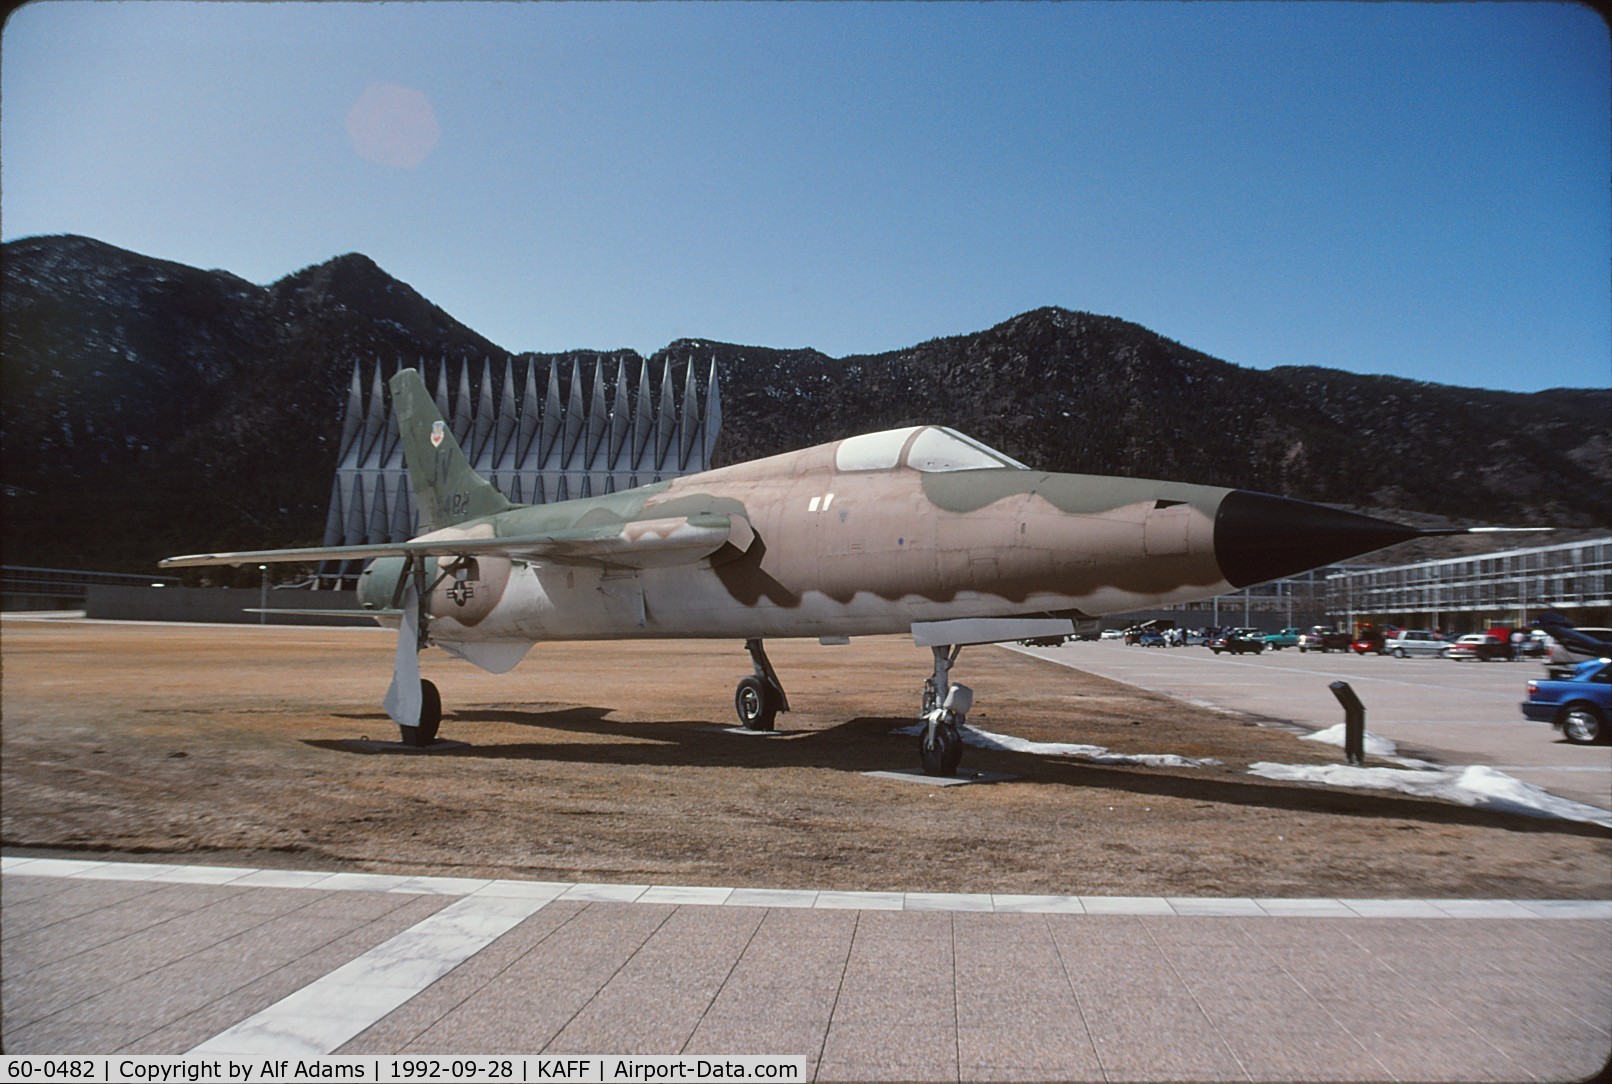 60-0482, 1960 Republic F-105D Thunderchief C/N D169, Displayed at the USAF Academy, Colorado Springs, Colorado in 1992.